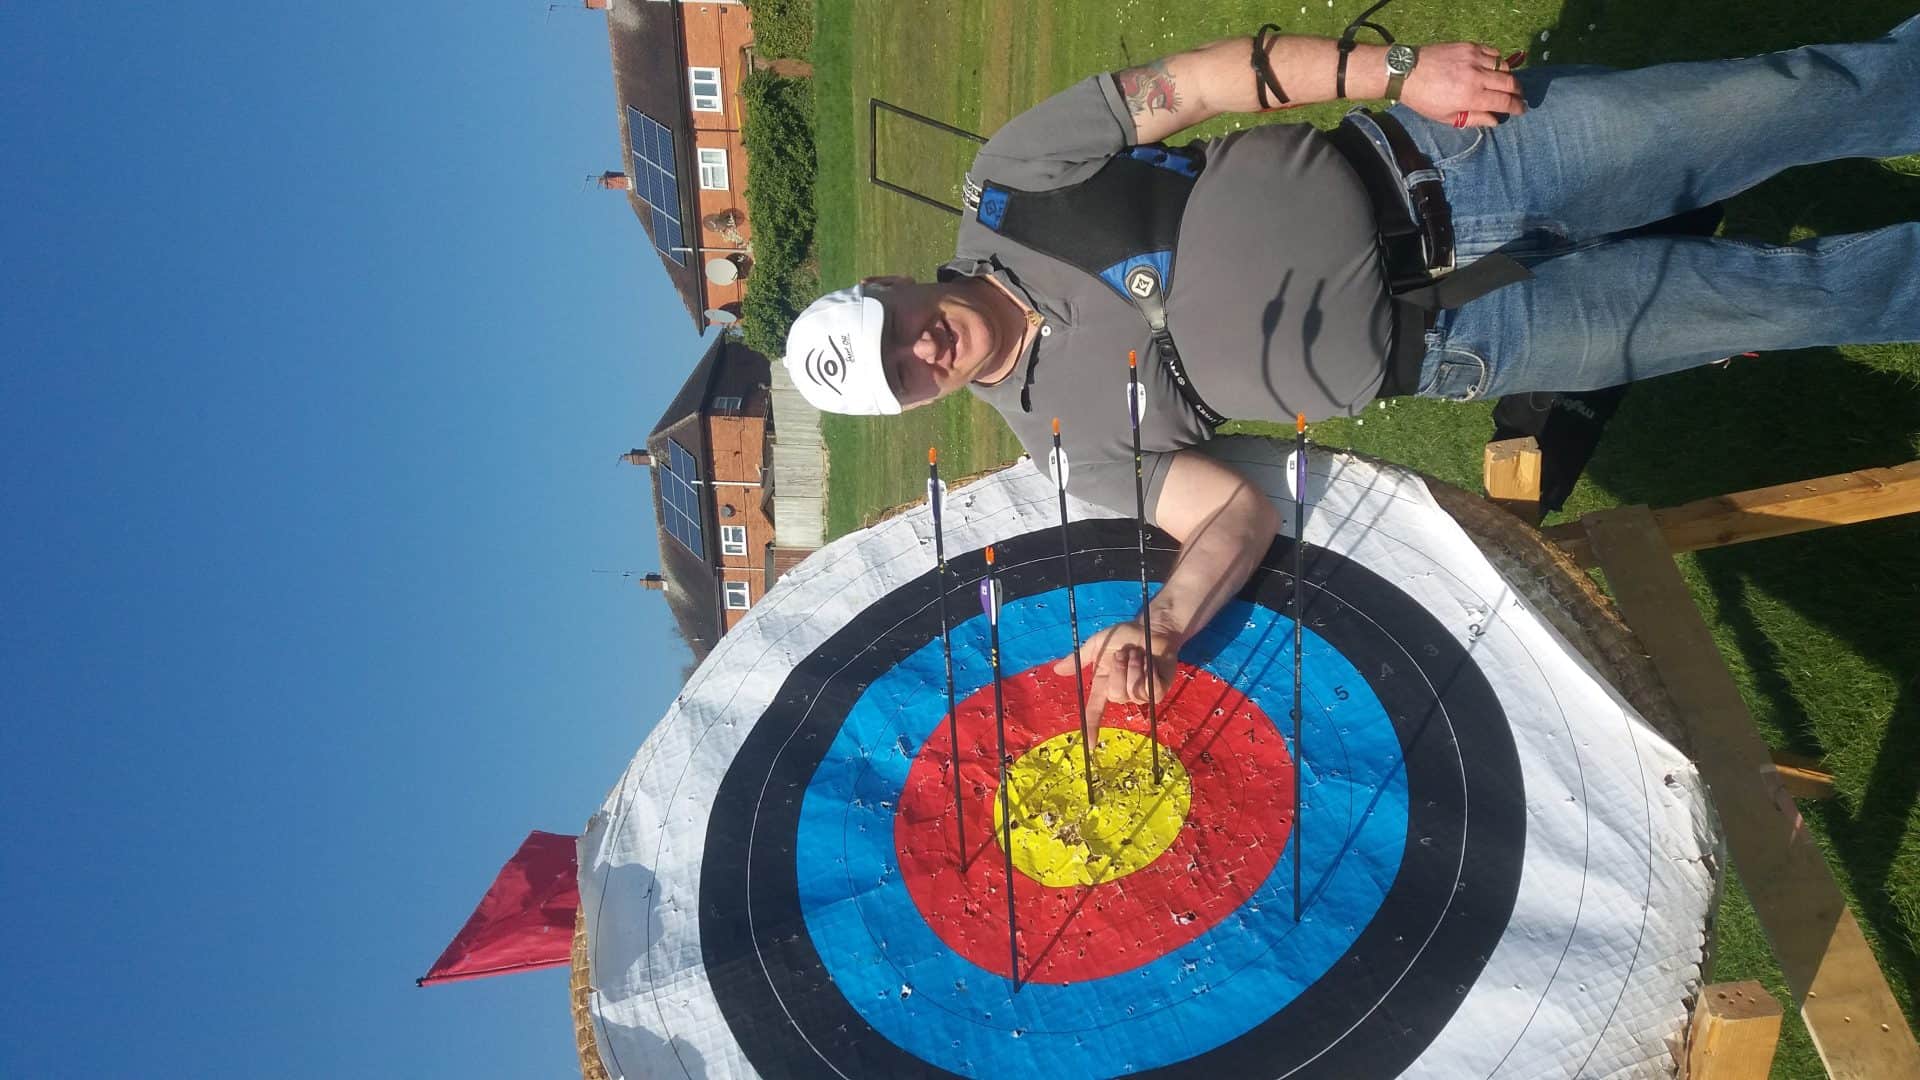 To say archery has had a positive effect on me is an understatement